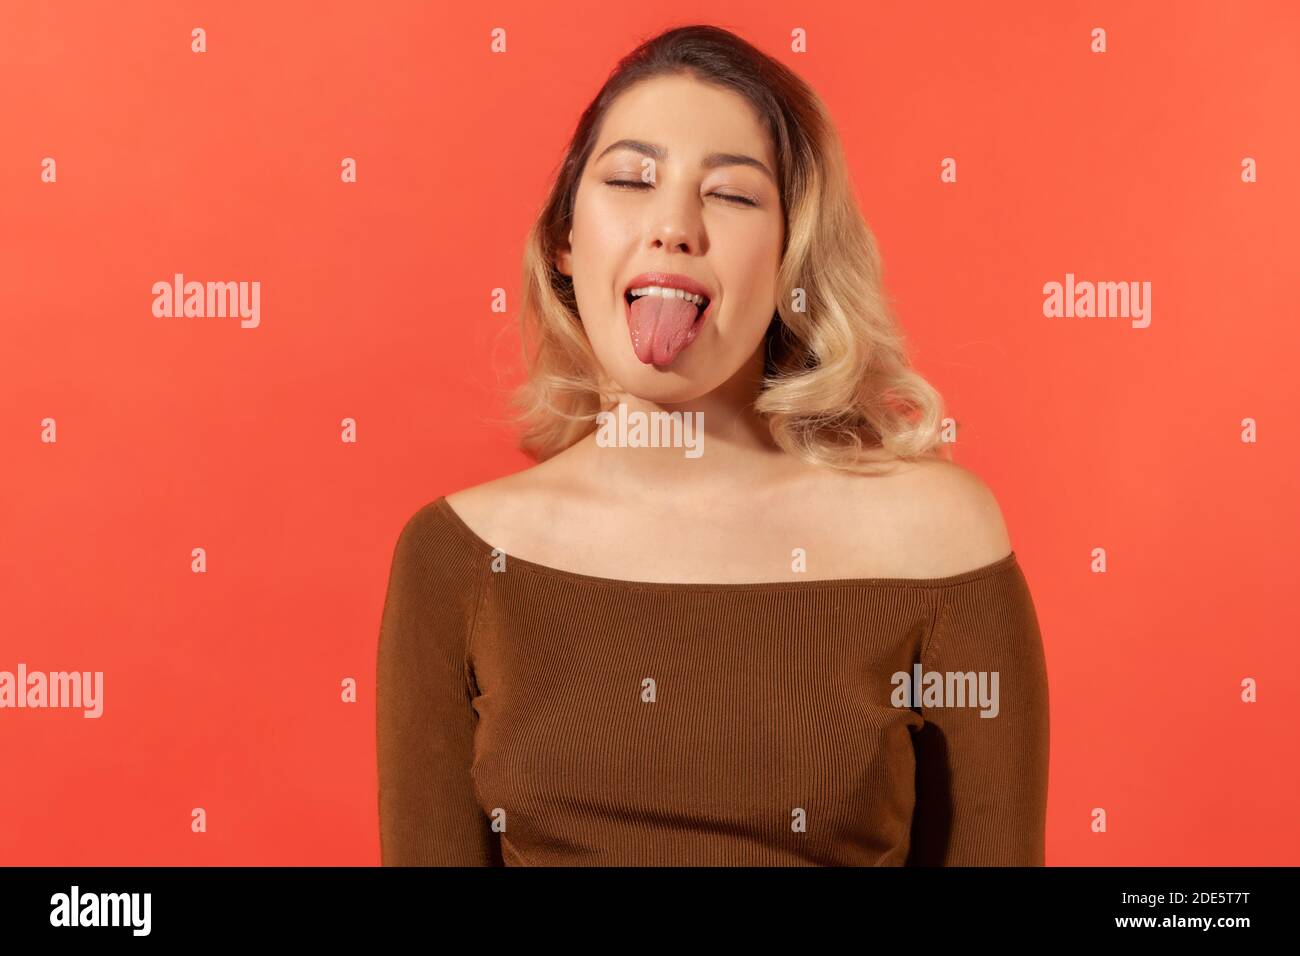 Portrait of funny disobedient young woman with blonde hair keeping eyes closed and demonstrating tongue, behaving naughty unruly, childish mood. Indoo Stock Photo